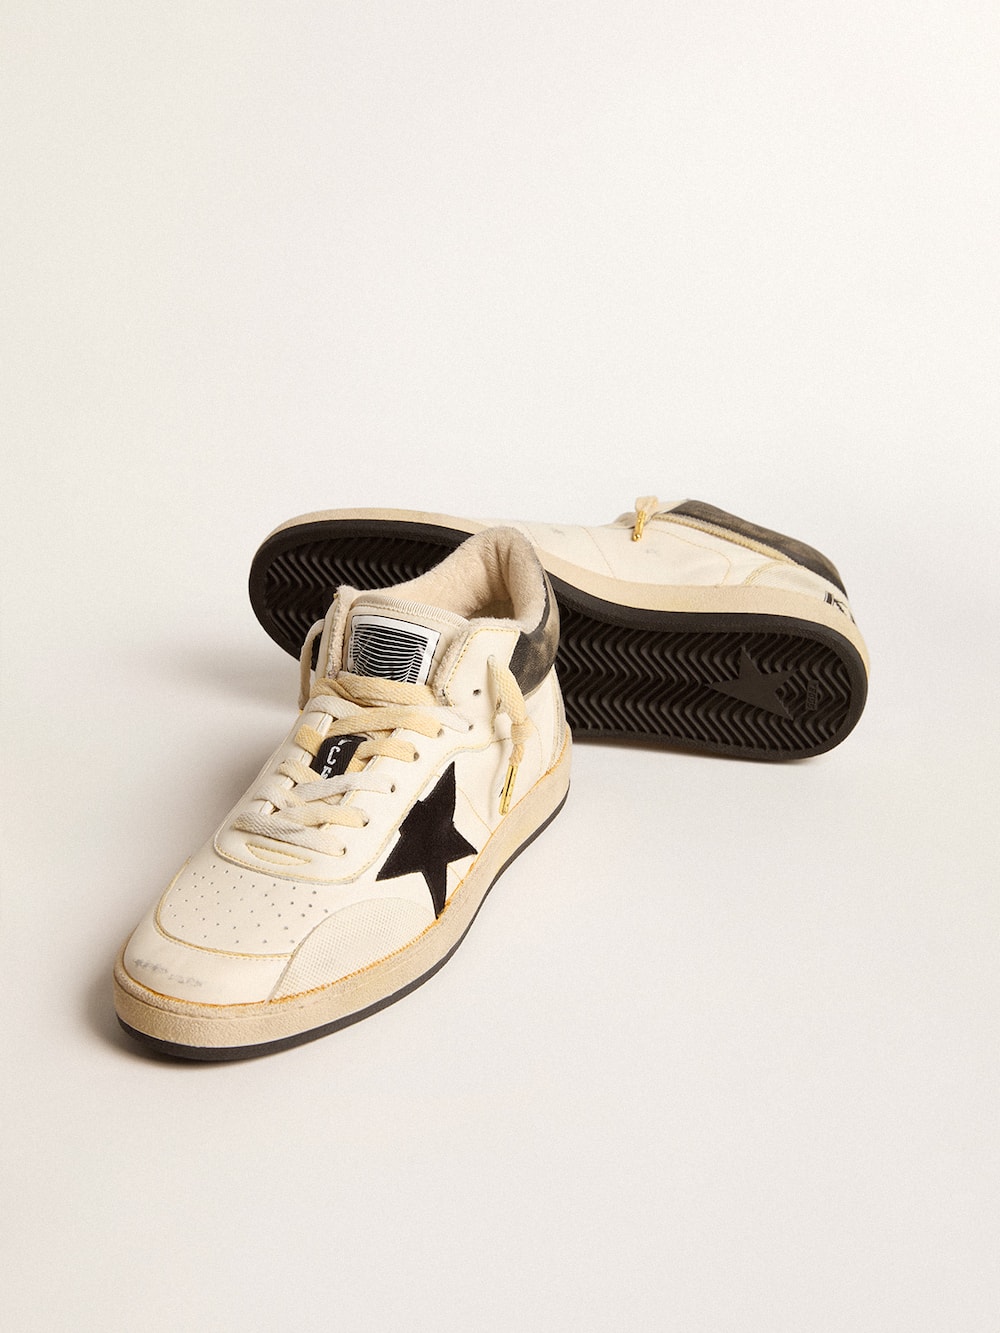 Golden Goose - Women’s Ball Star Pro Mid in aged white leather with black star in 